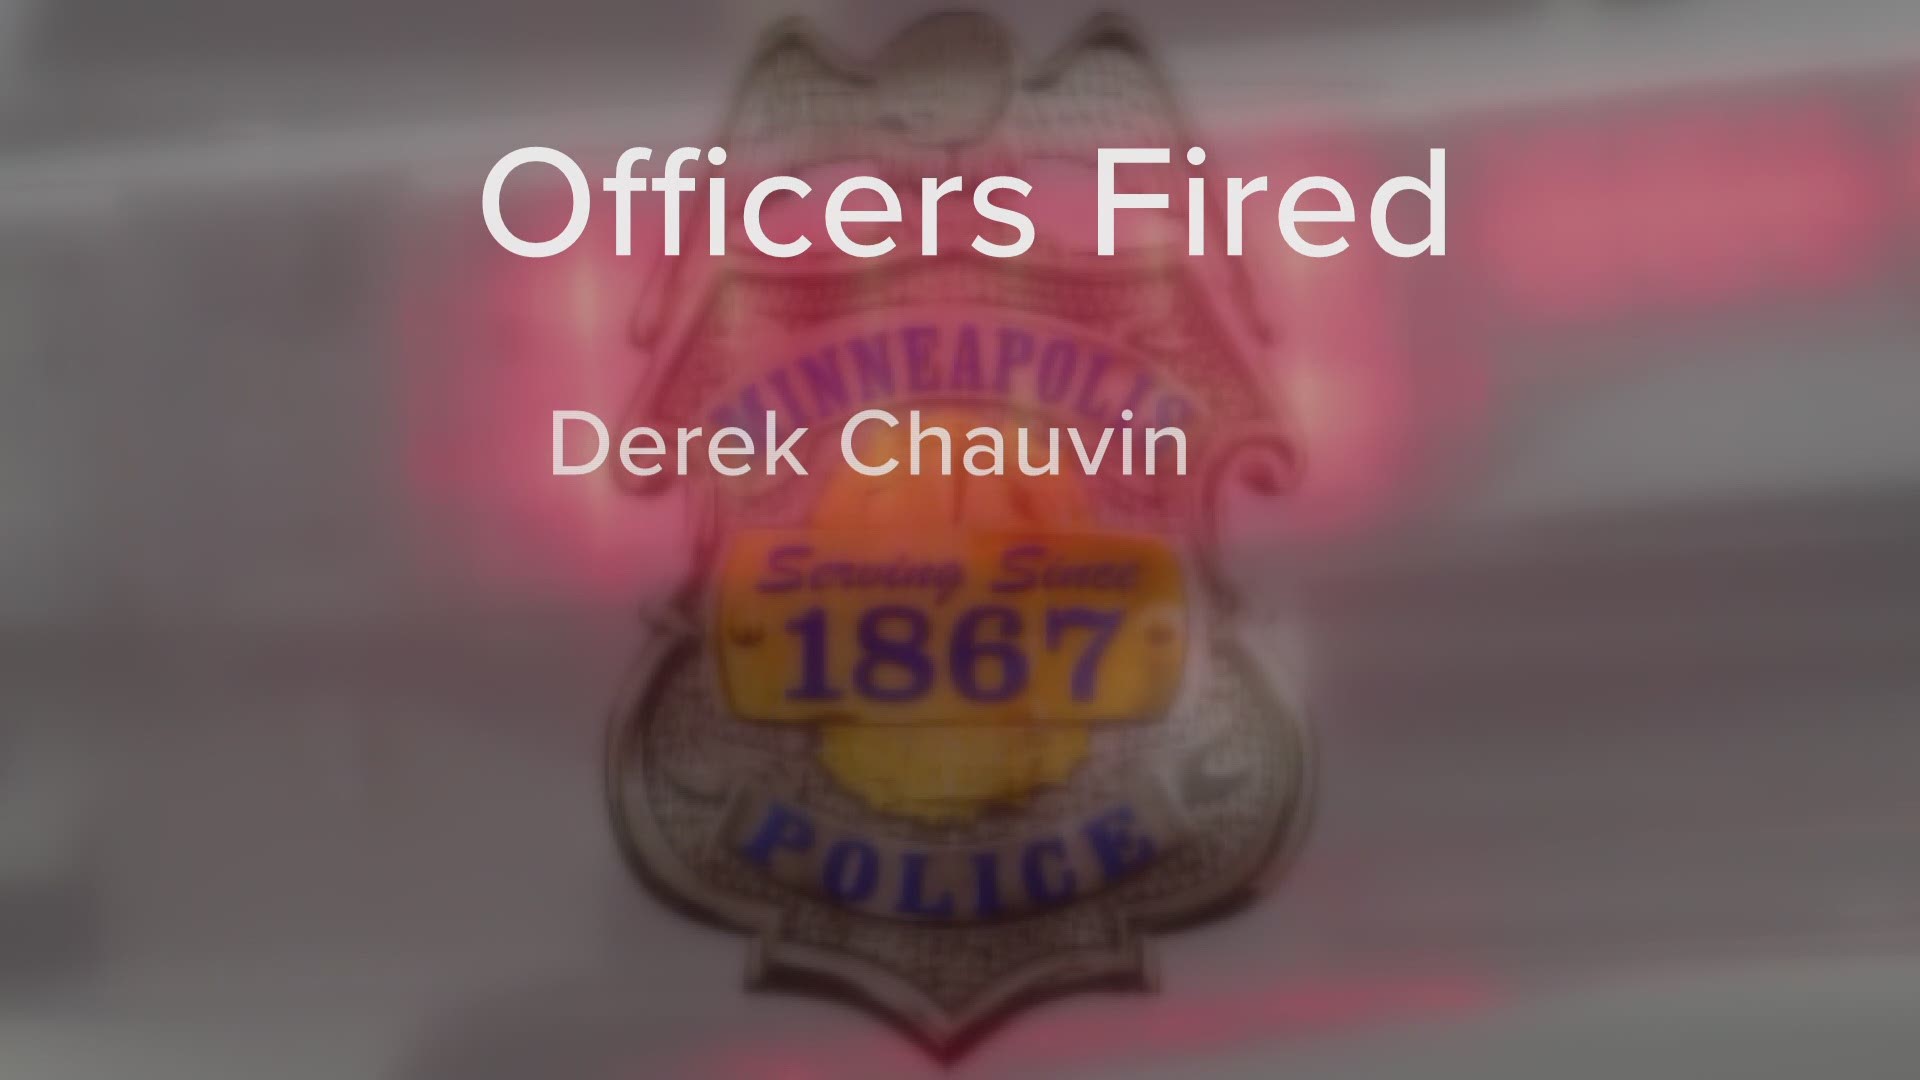 A KARE 11 Investigation found Derek Chauvin had been involved in previous shootings. Tou Thao was the subject of an excessive force lawsuit.